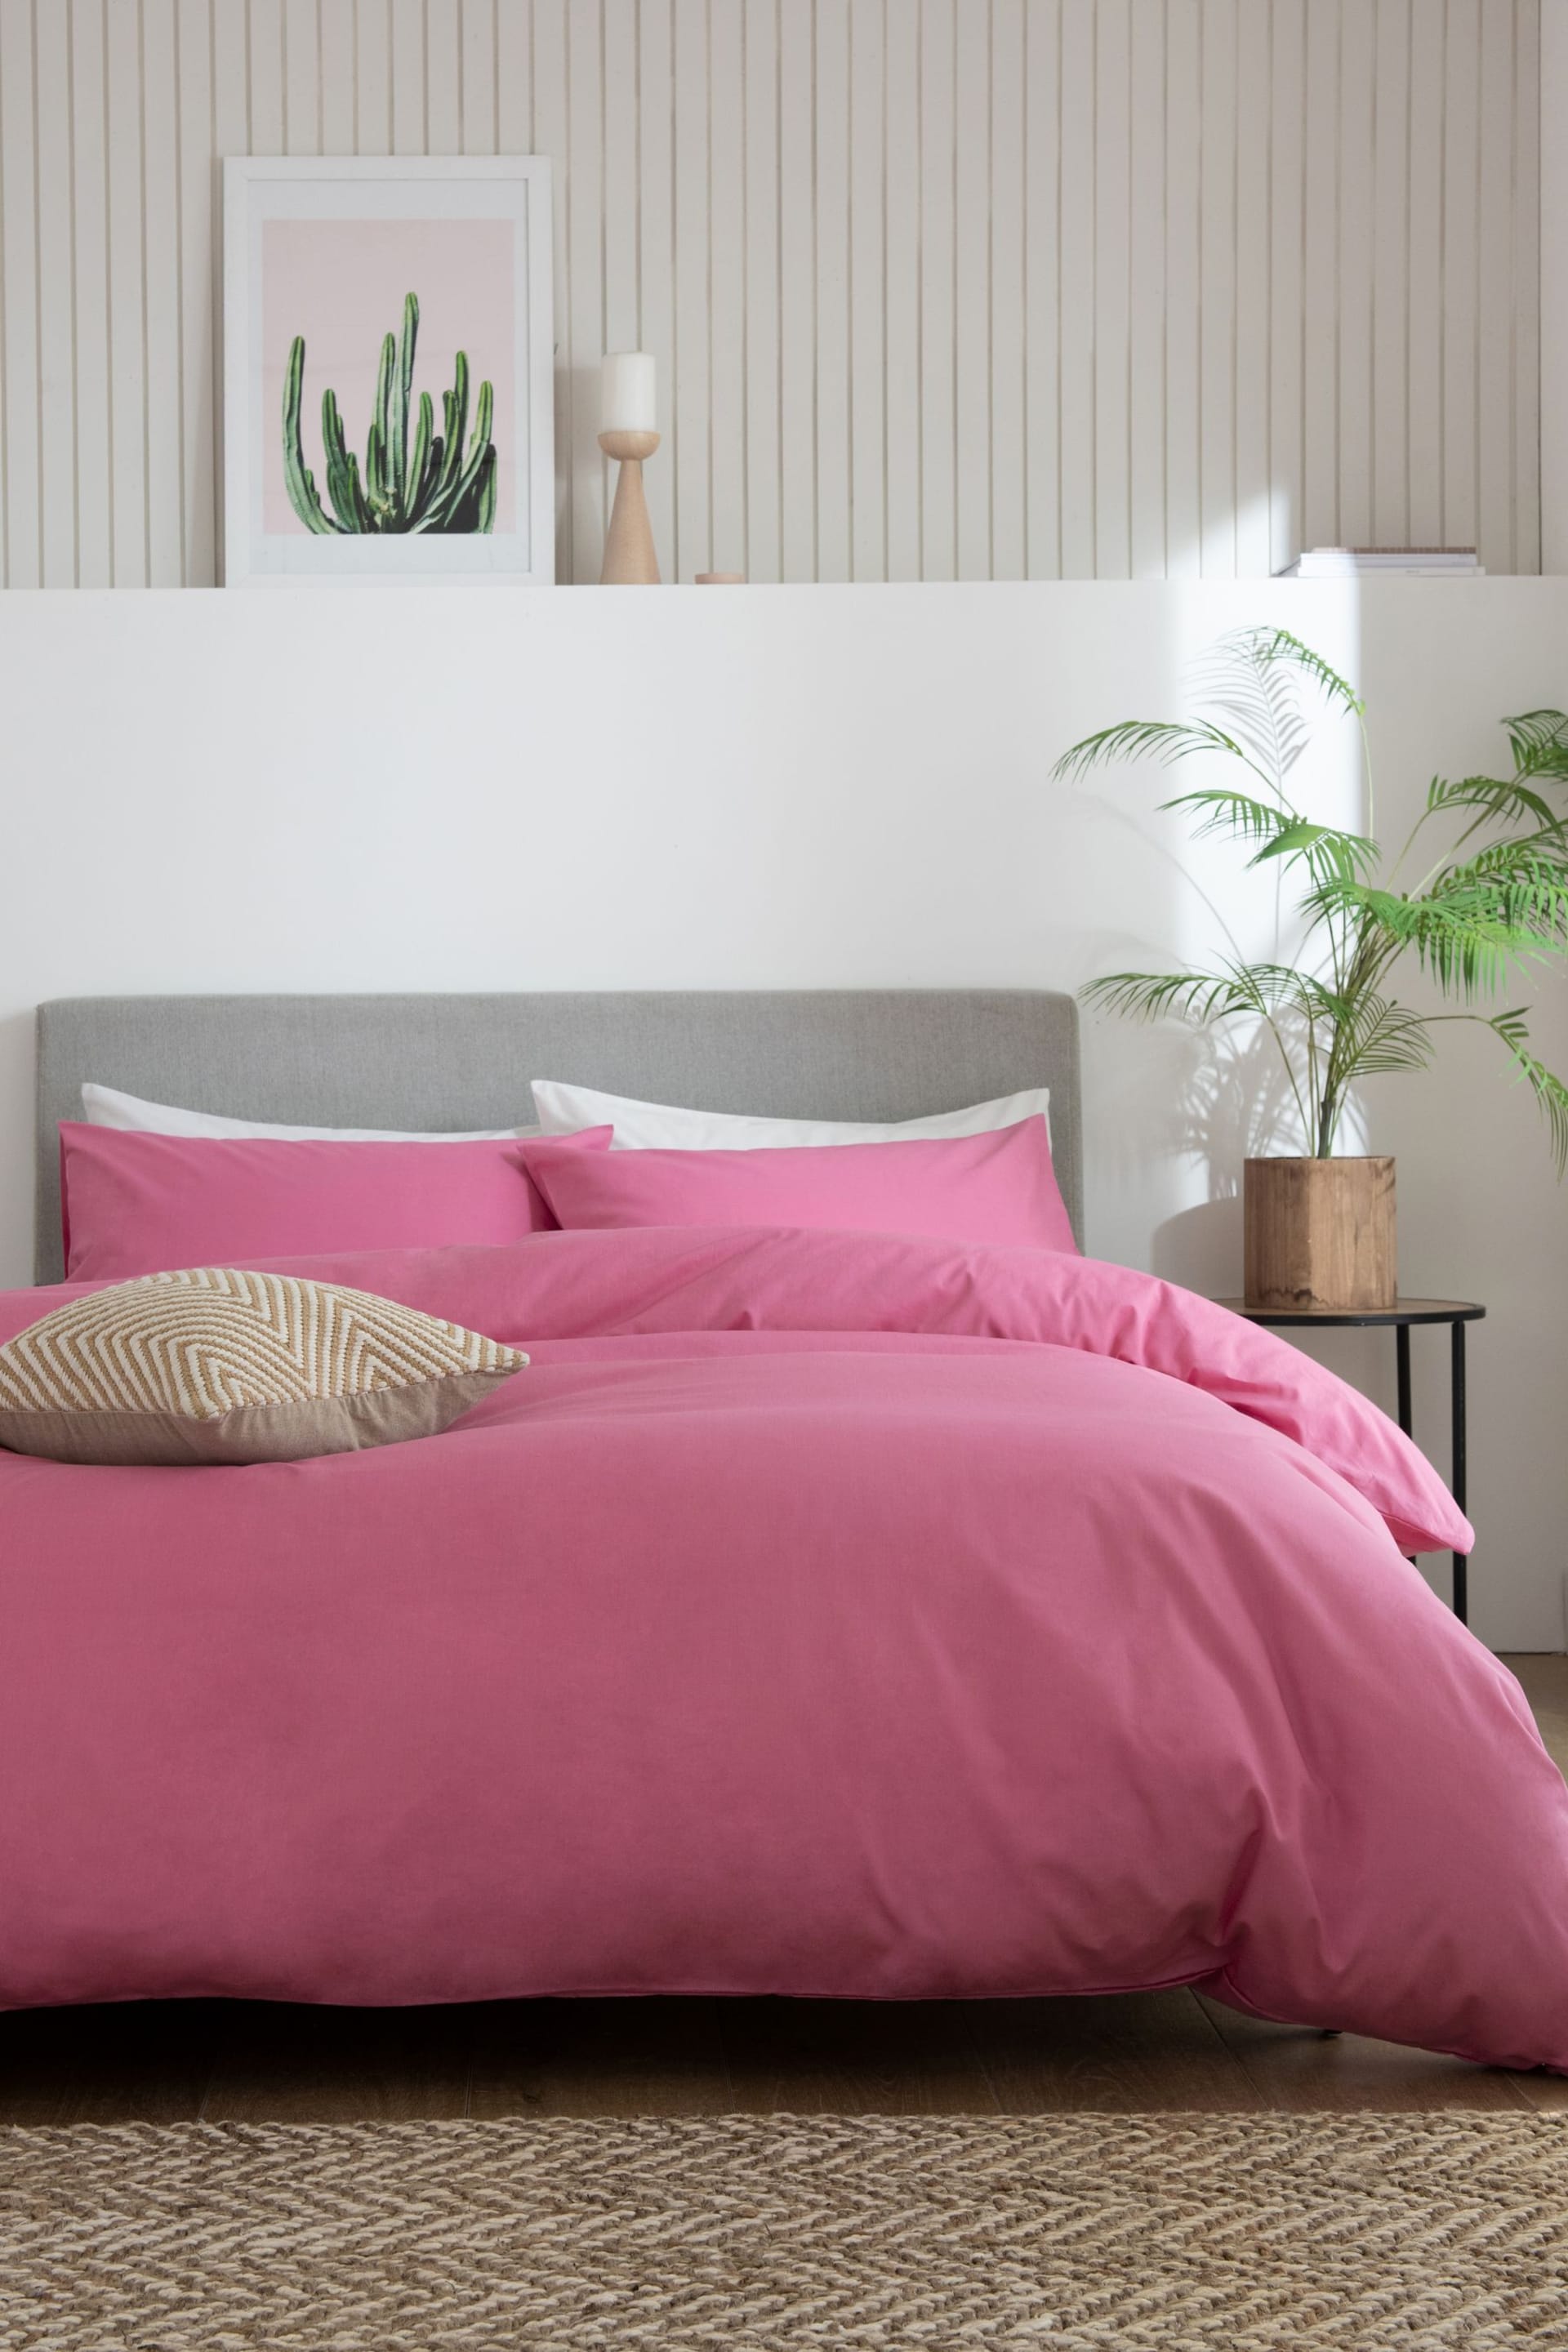 Pink Bright Cotton Rich Plain Duvet Cover and Pillowcase Set - Image 1 of 4